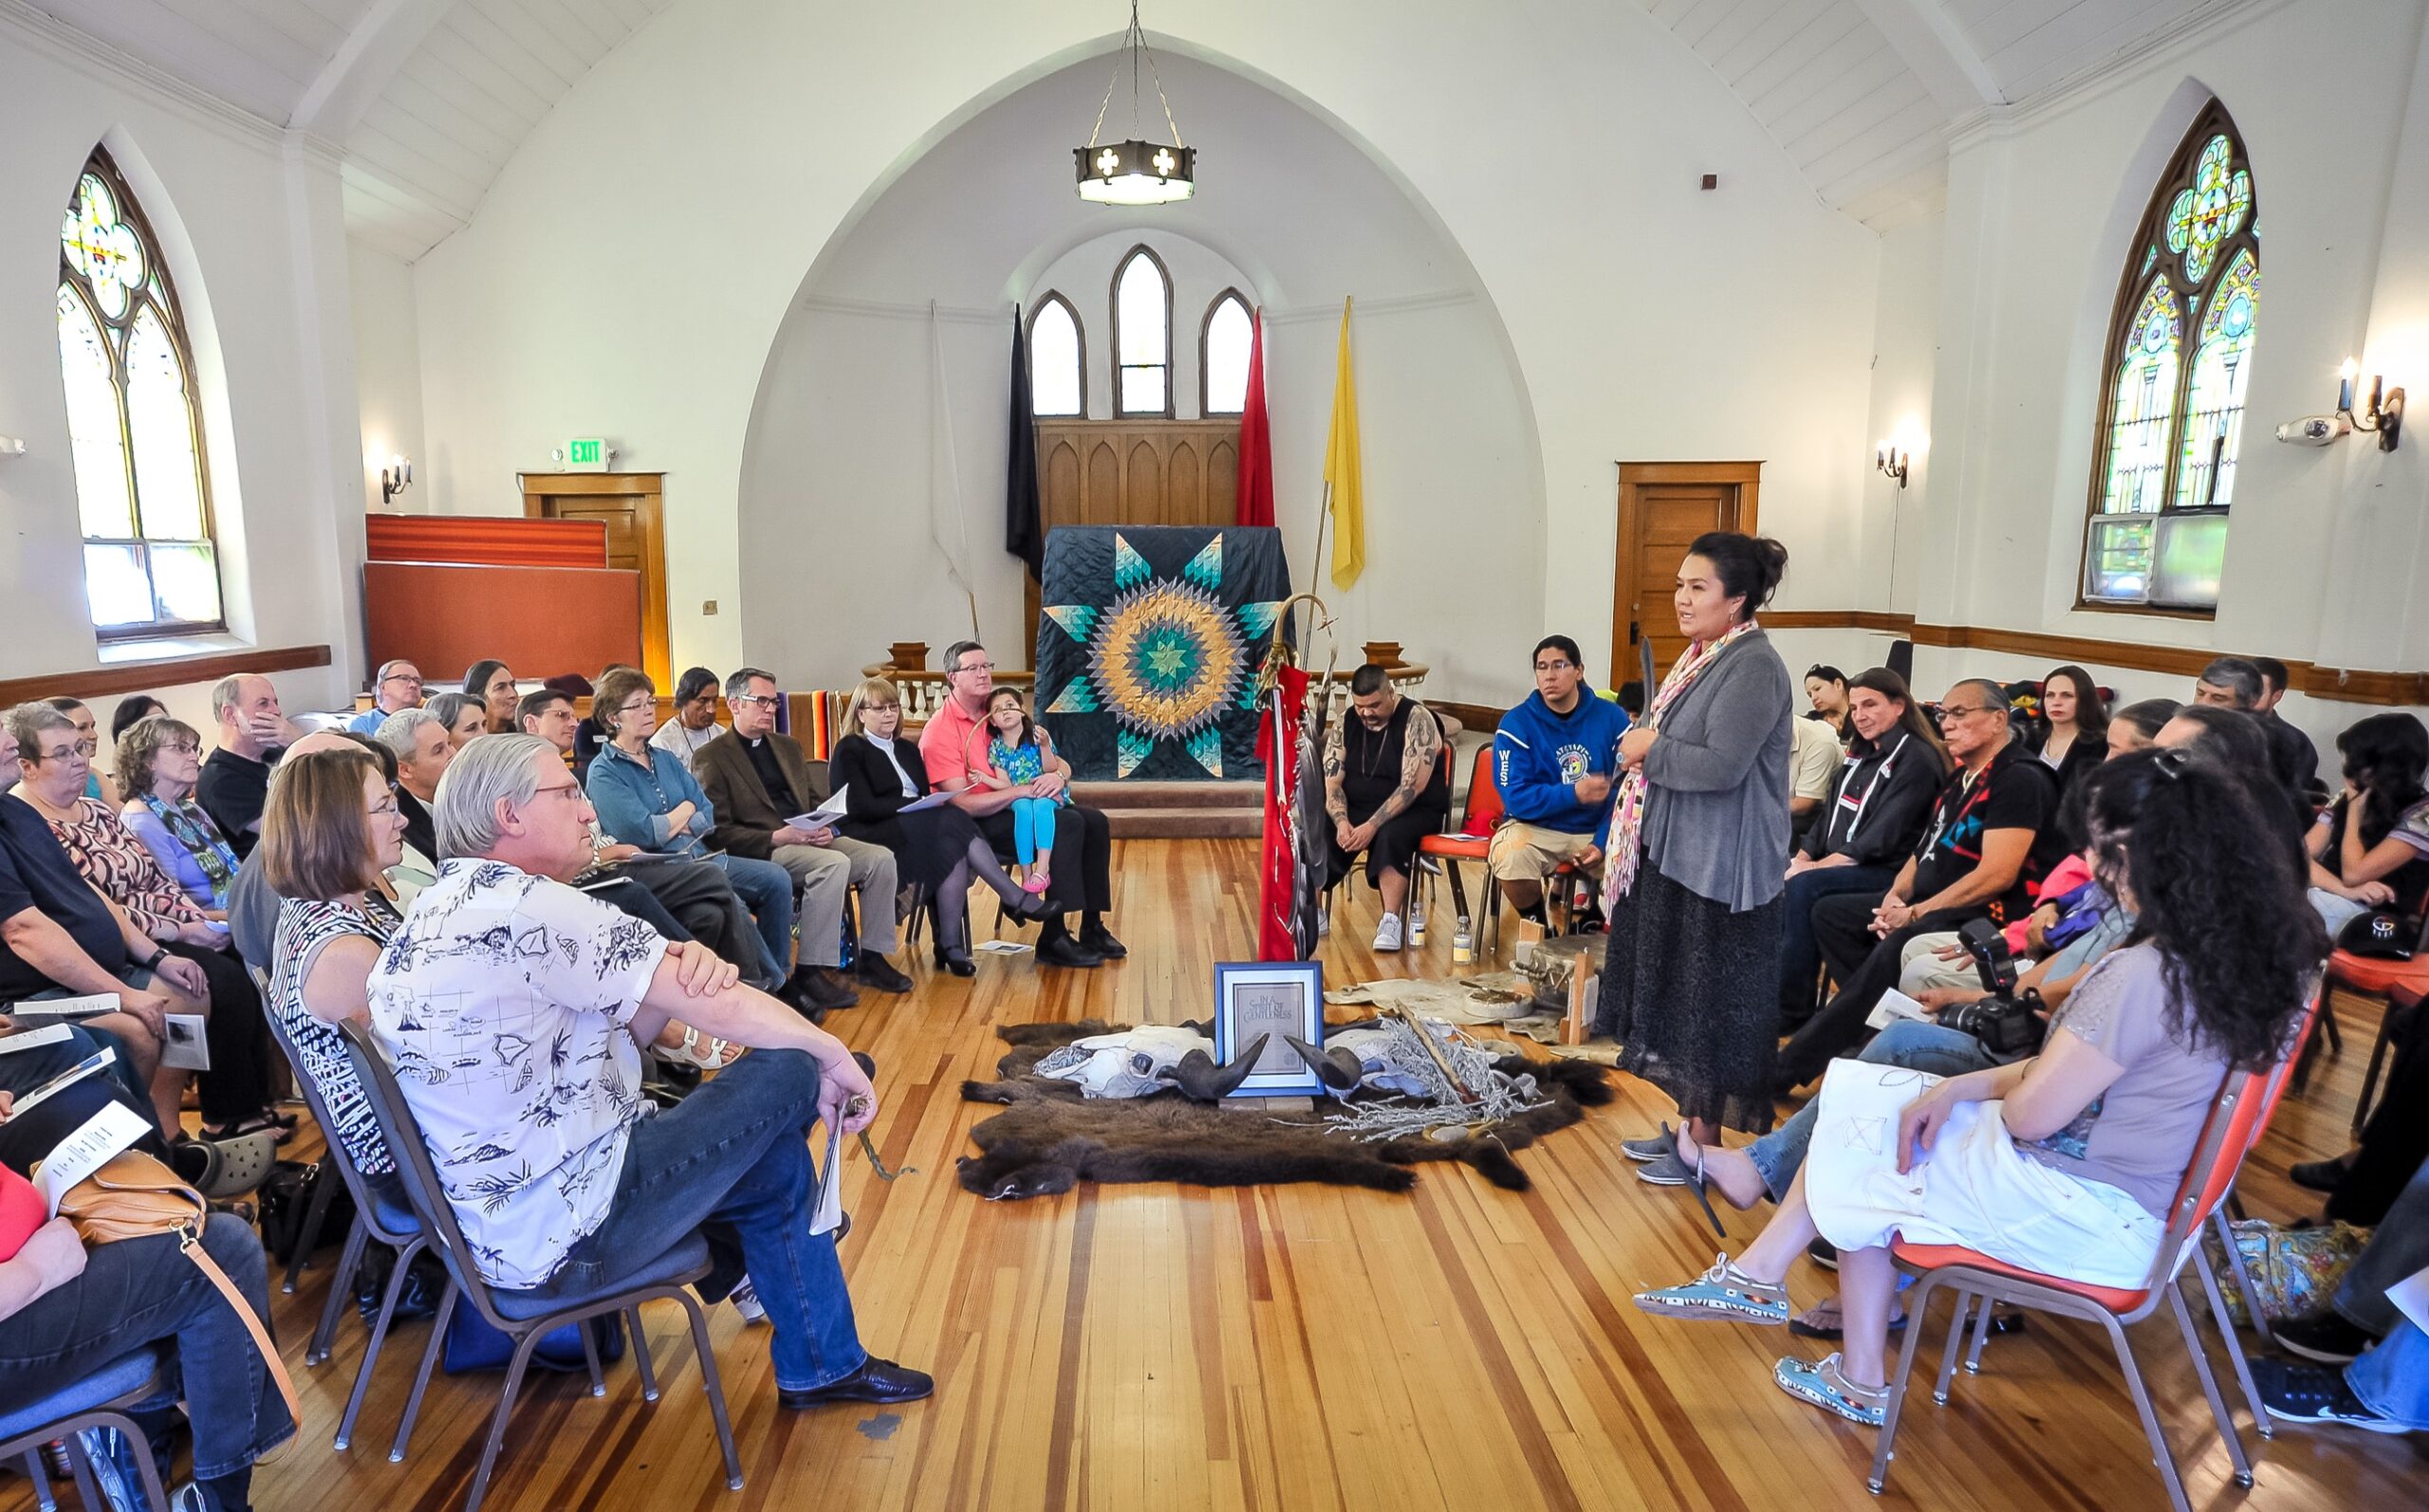 People sit in a circle around object of significance in a church building, with one person speaking in the center.